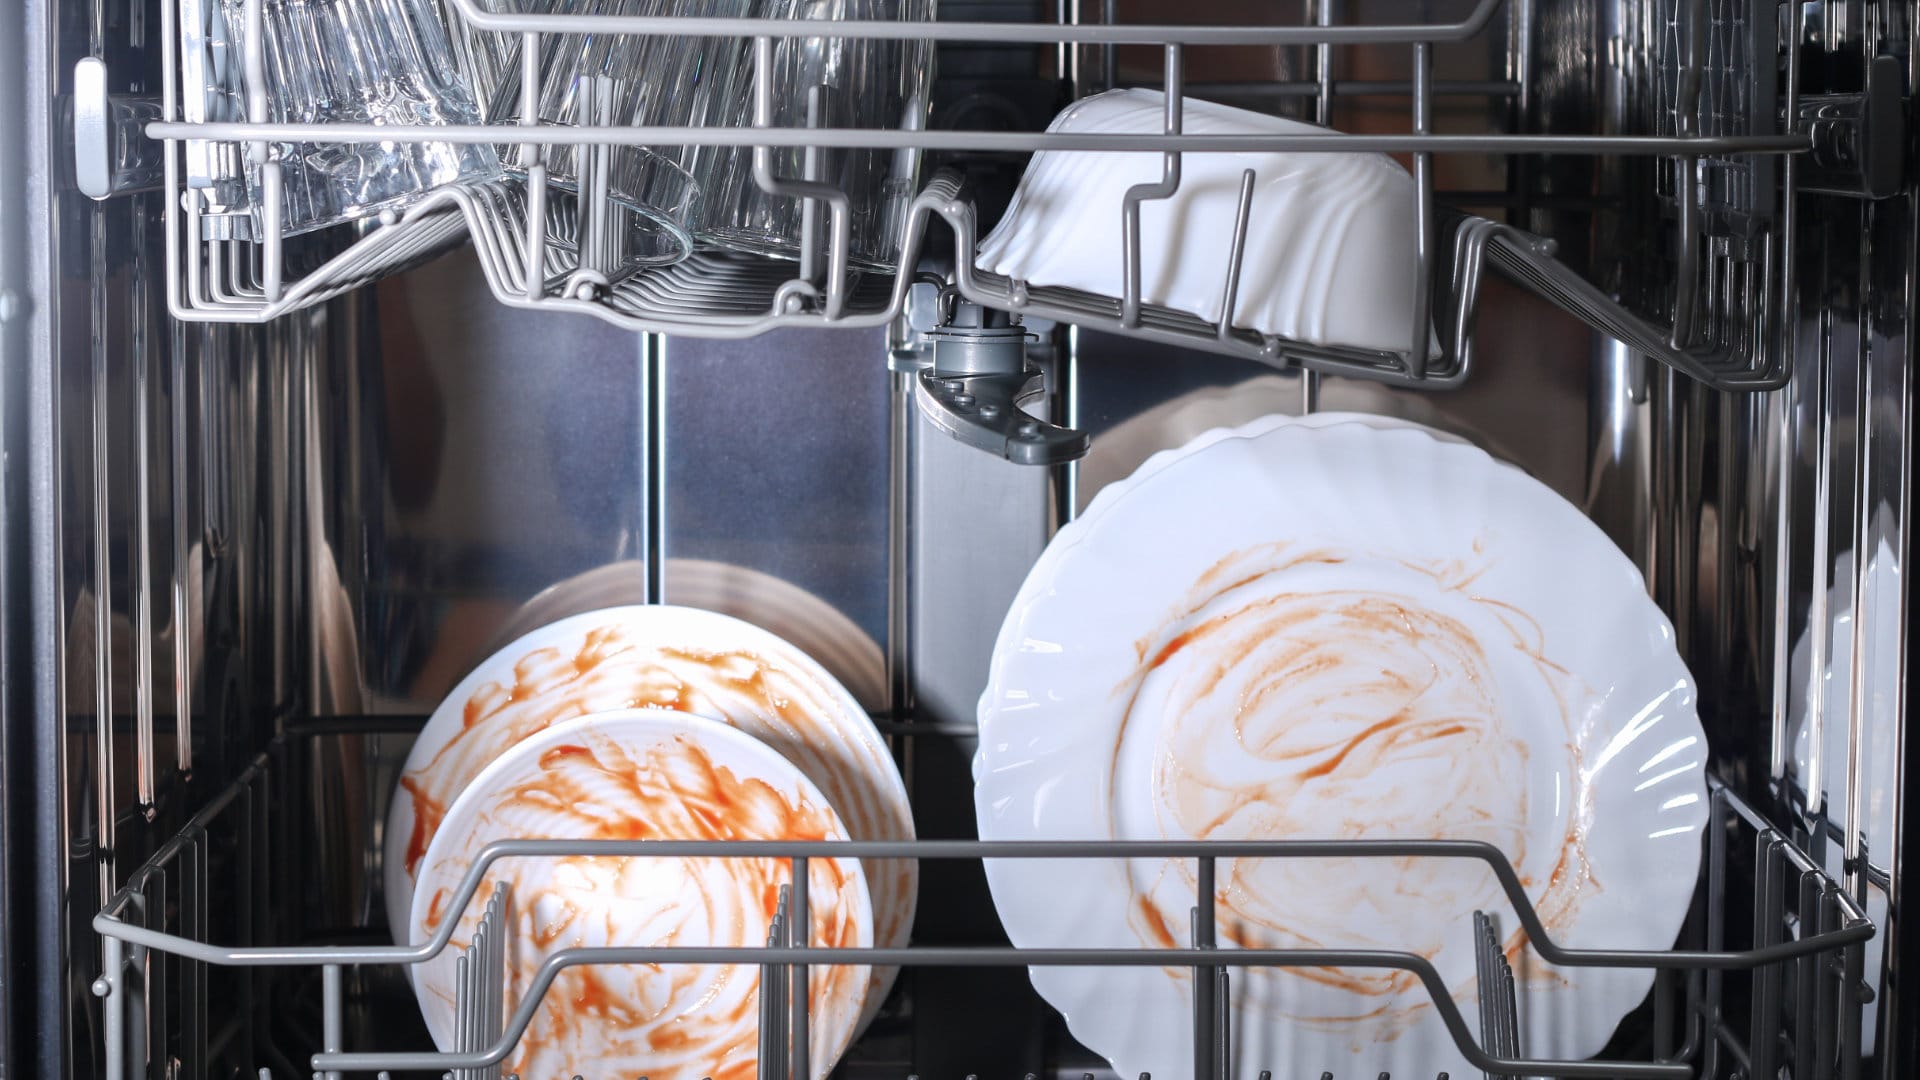 Featured image for “How to Clean a Smelly Dishwasher (in 4 Steps)”